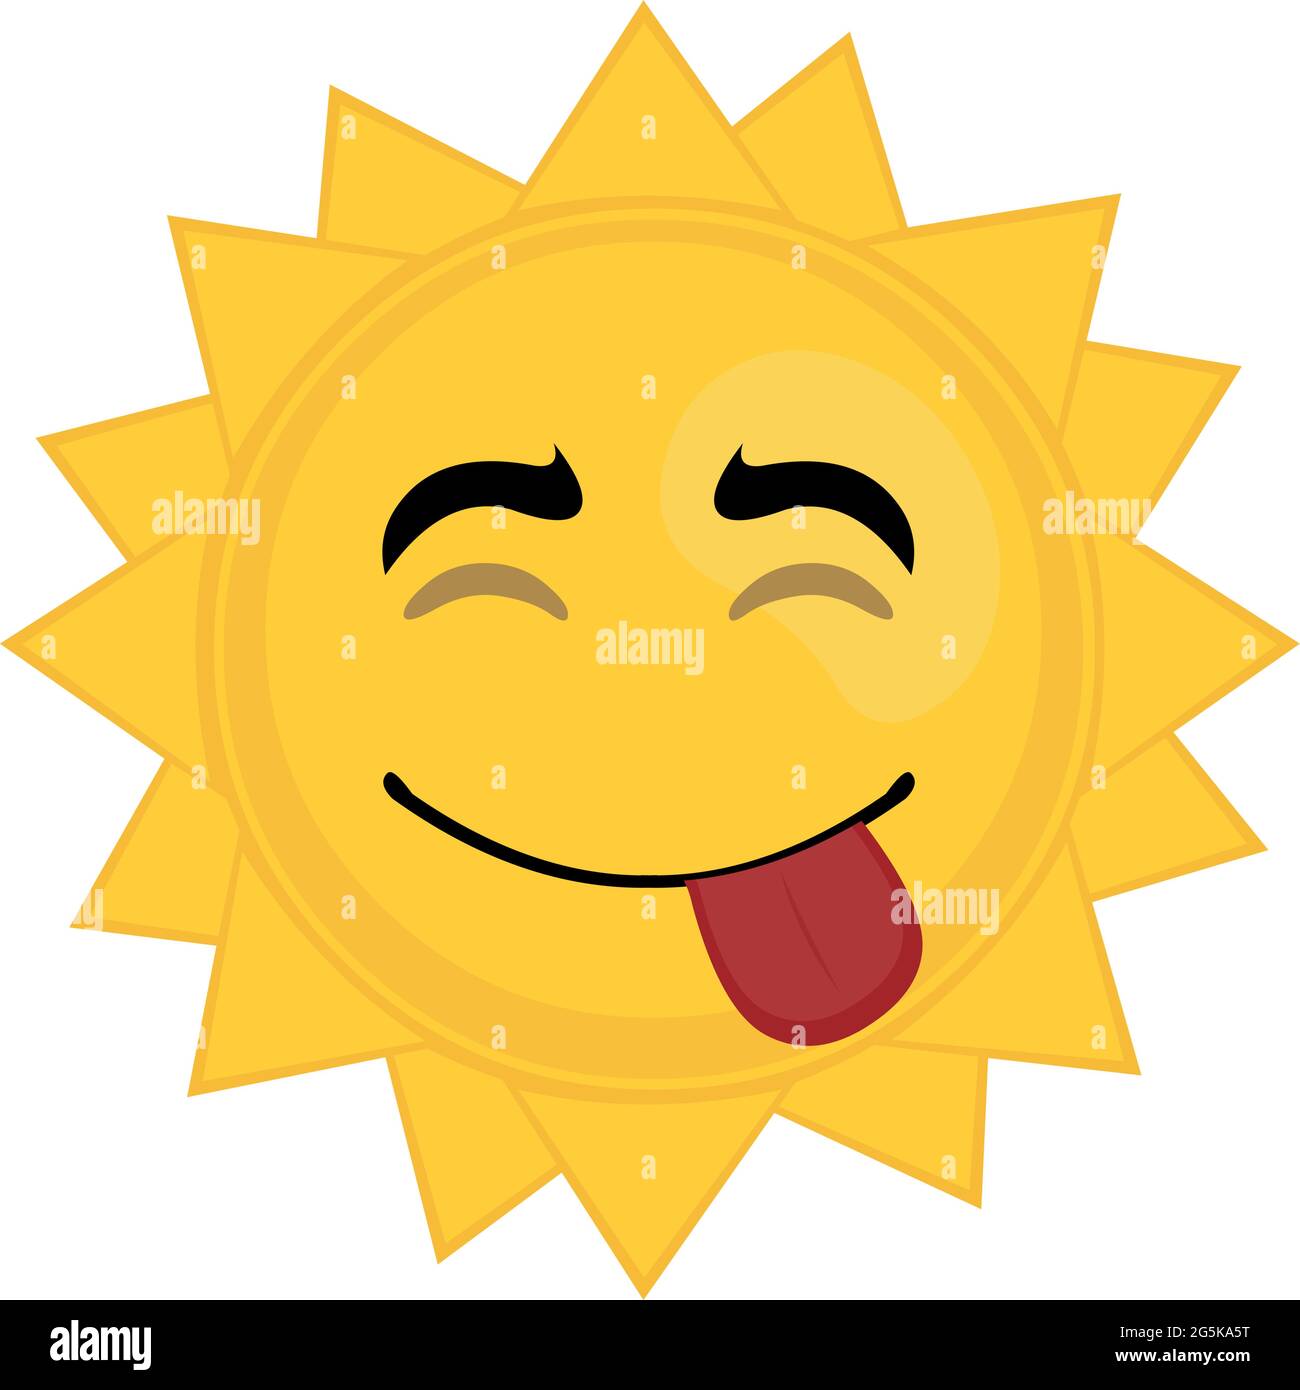 Vector emoticon illustration of a cartoon sun character with a happy expression with his tongue out Stock Vector